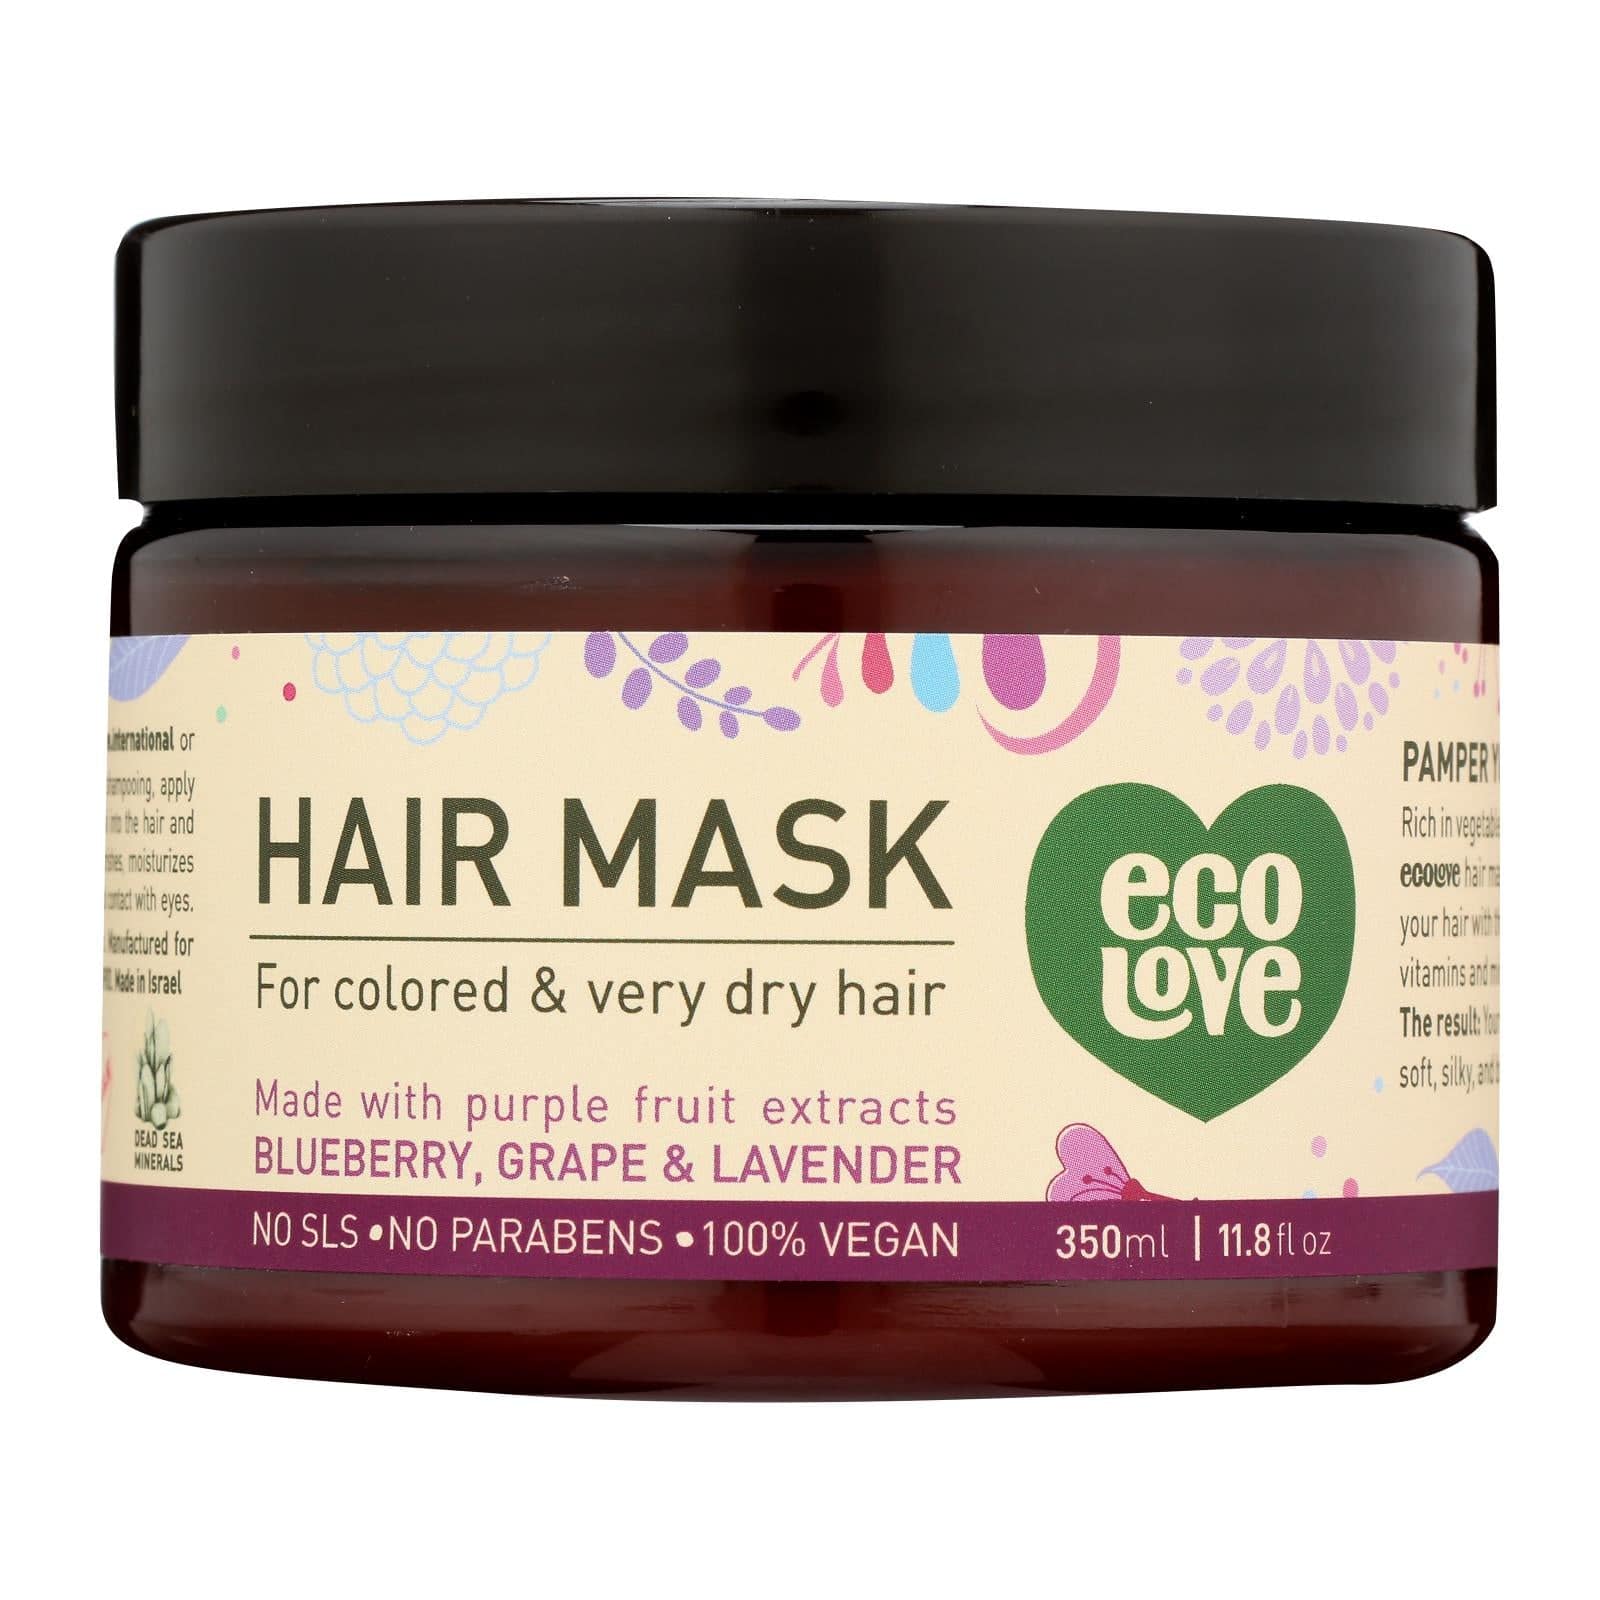 Buy Ecolove Hair Mask - Purple Fruit Hair Mask For Colored And Very Dry Hair  - Case Of 1 - 11.8 Oz.  at OnlyNaturals.us